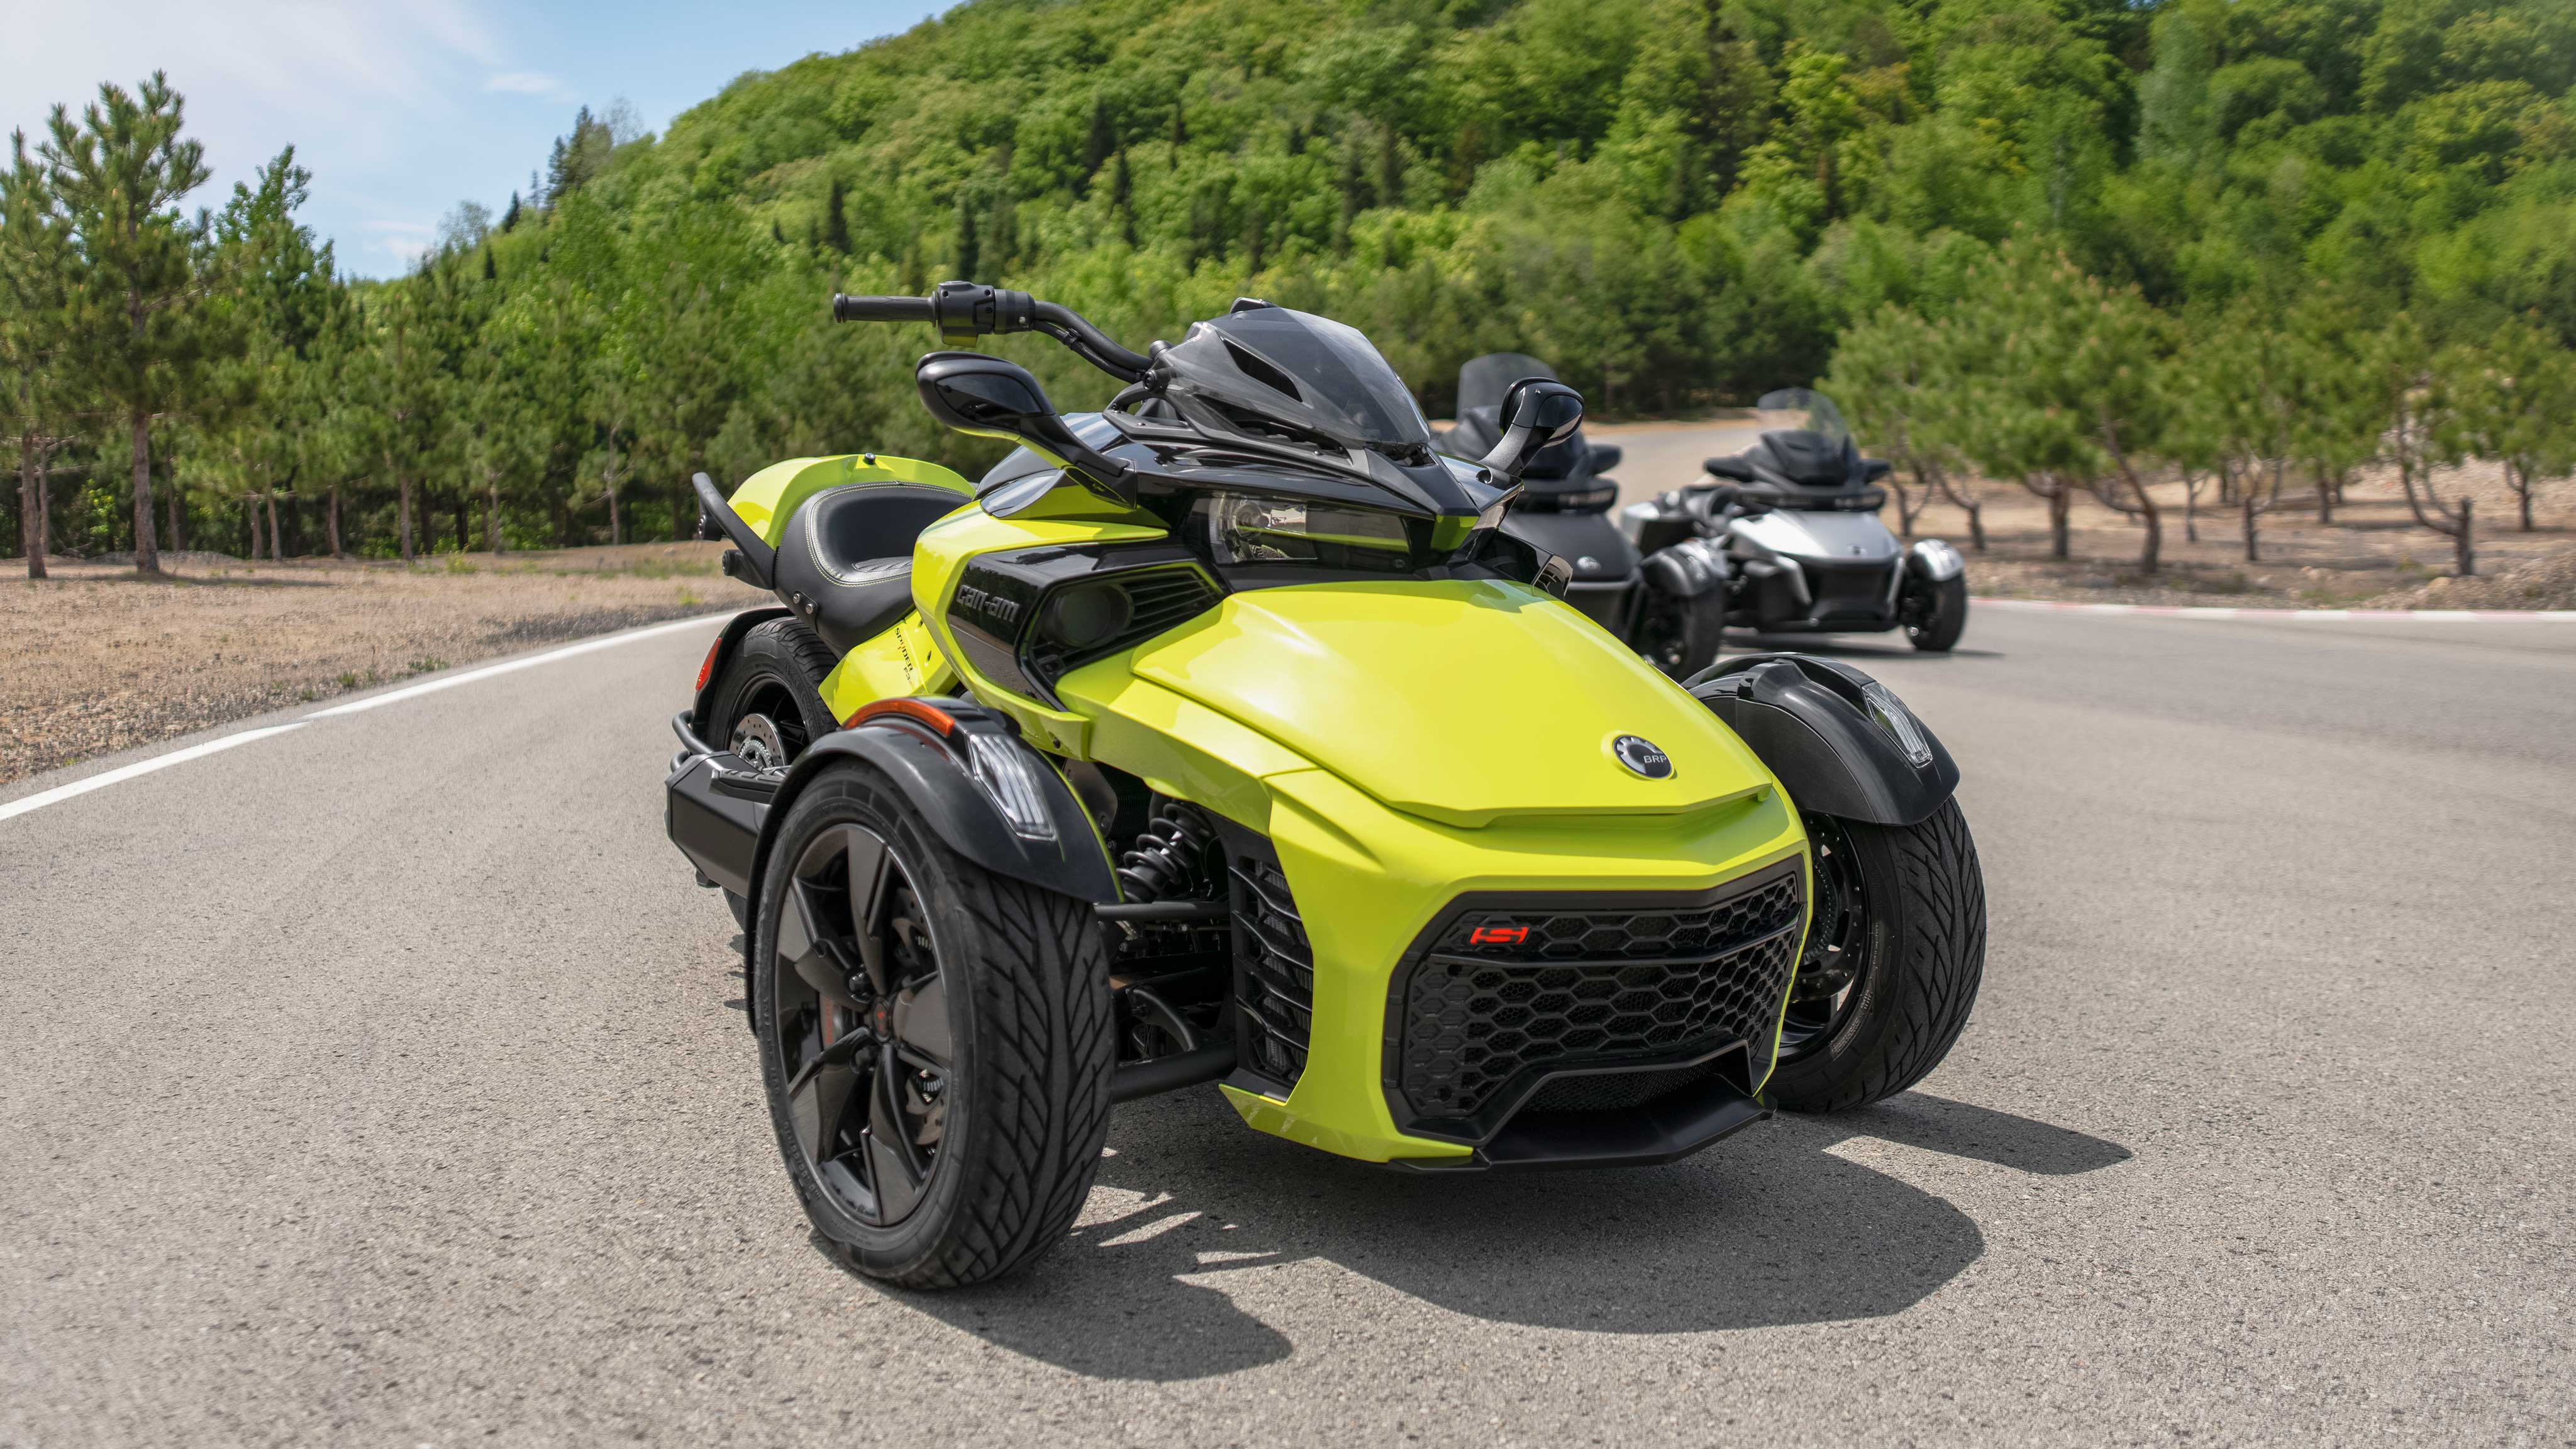 Front view of a Spyder F3-S